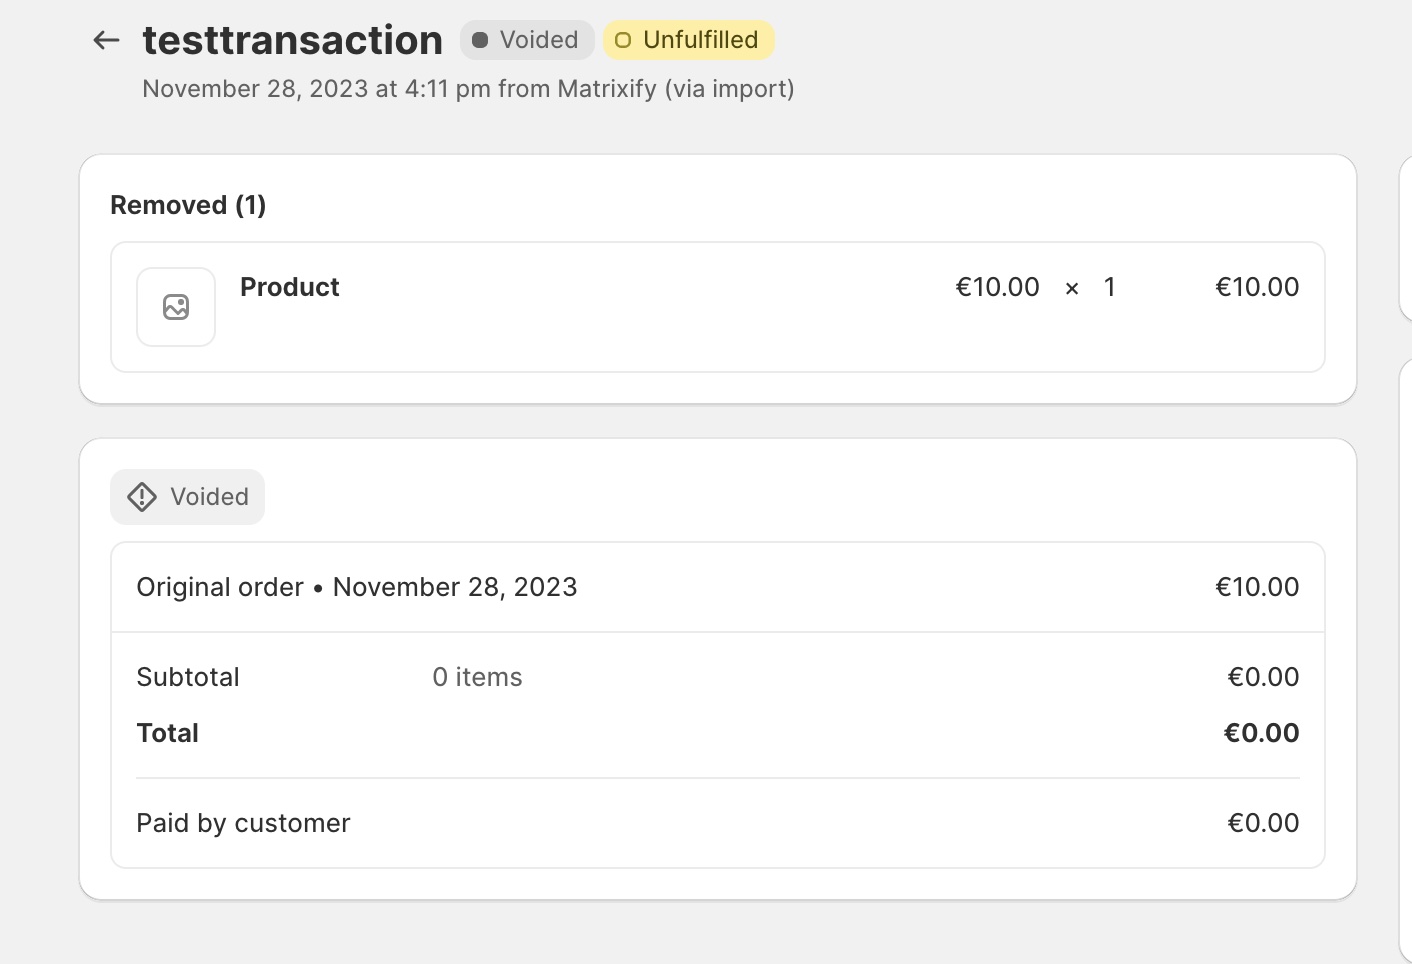 Voided Transaction Order which was Voided by Matrixify